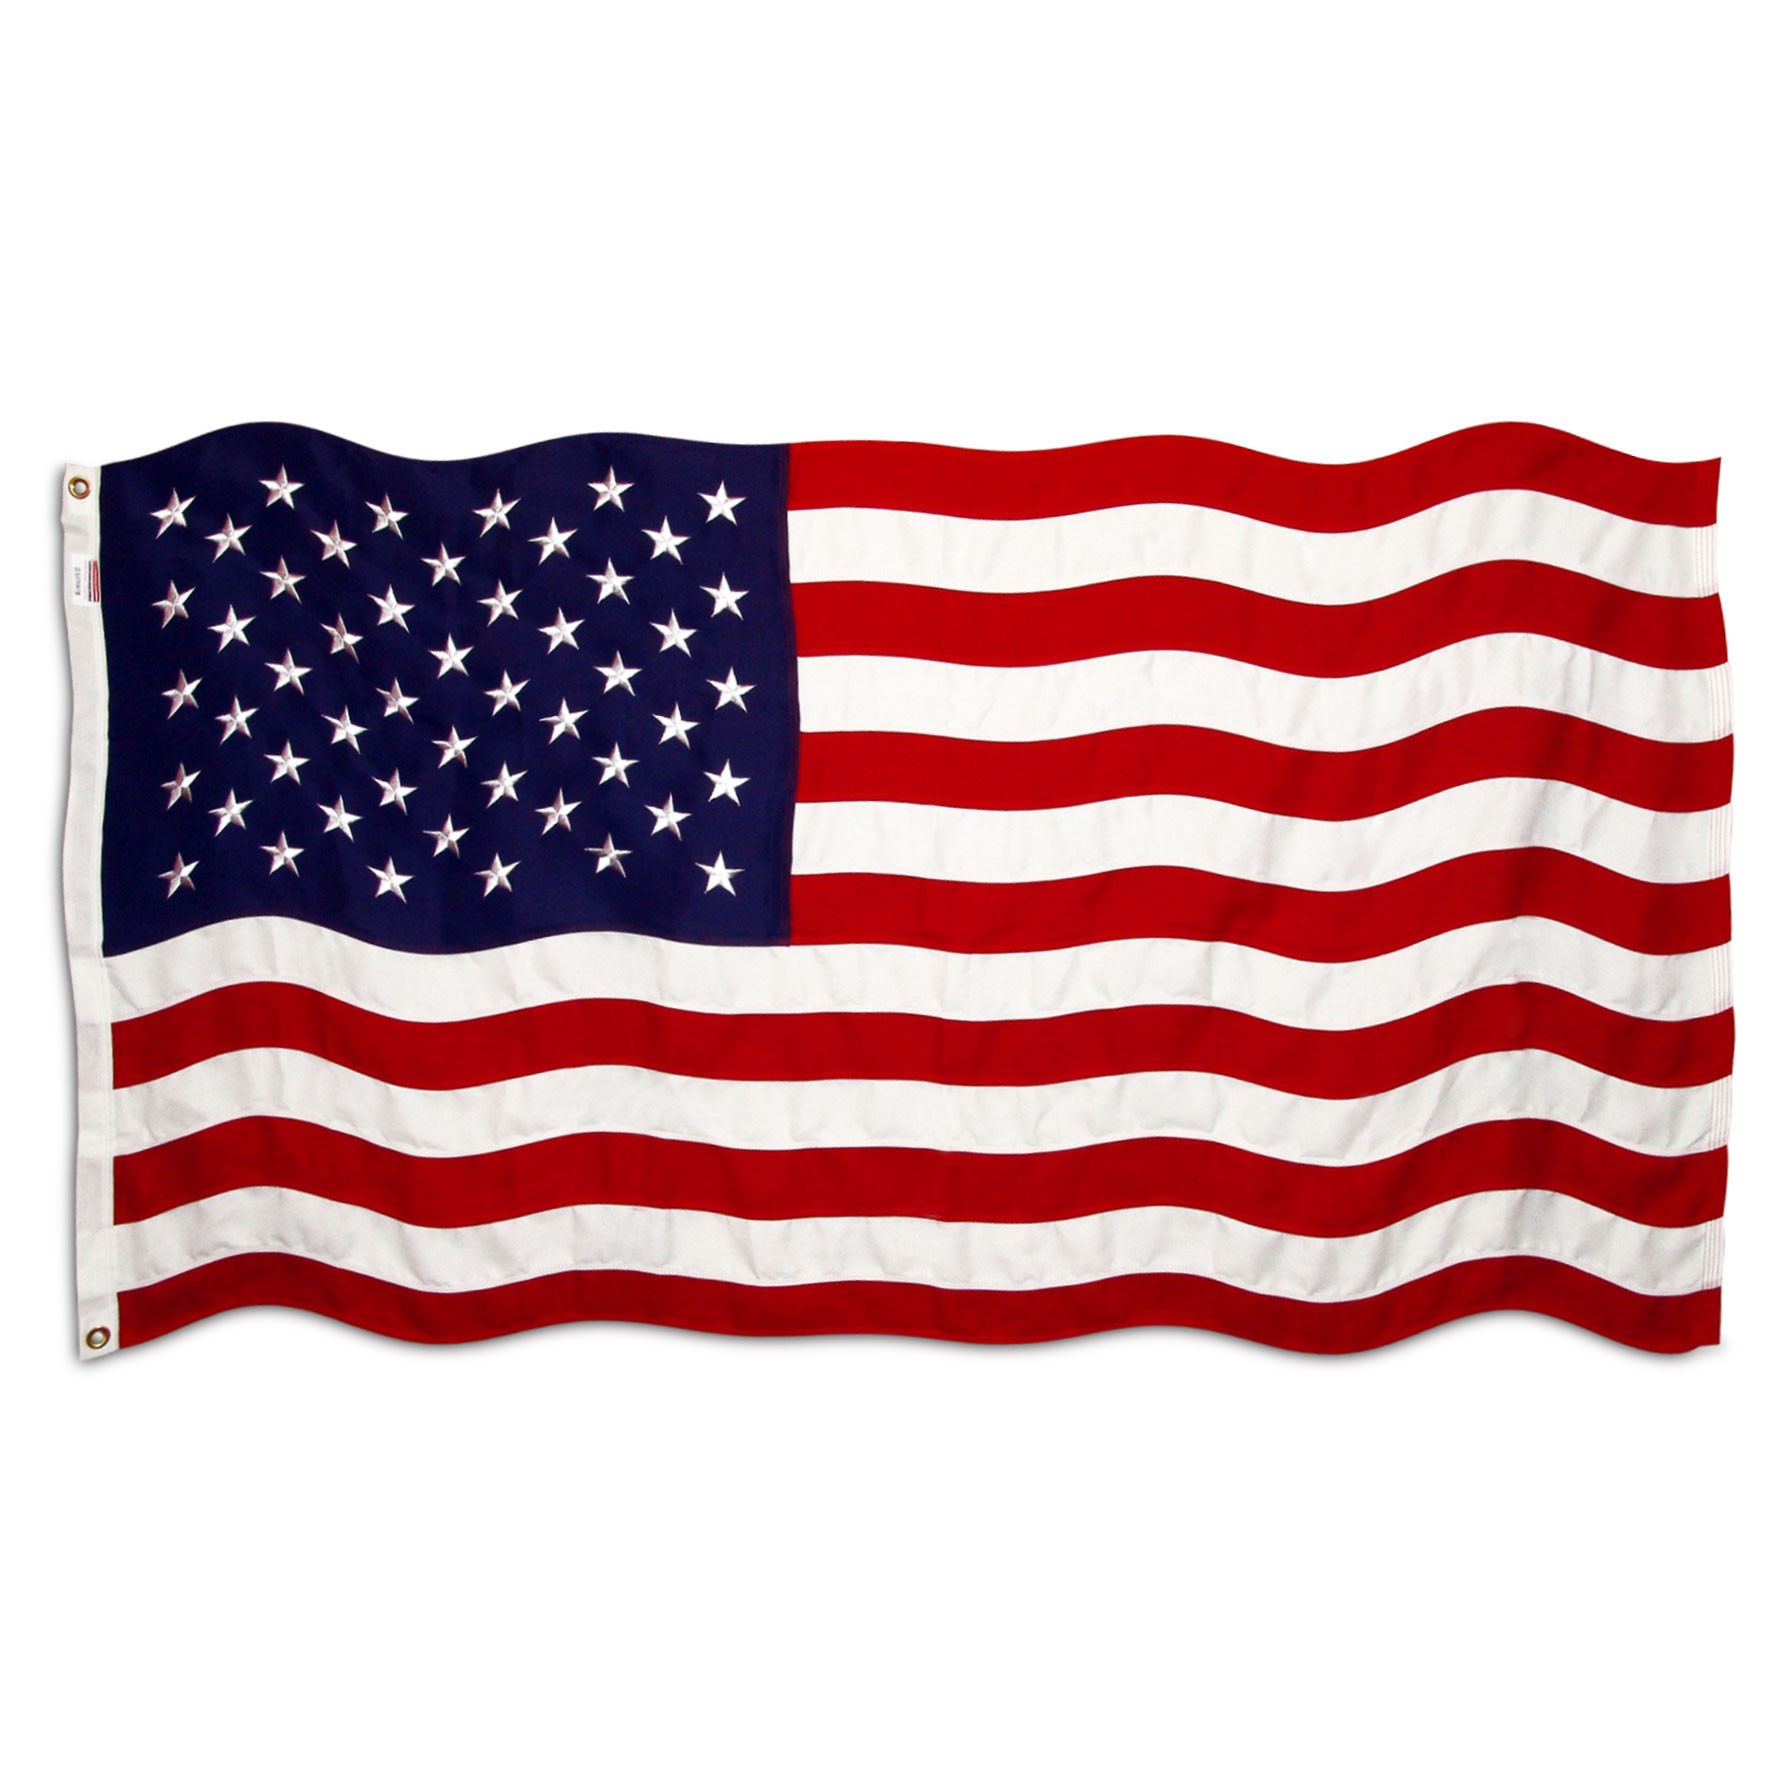 American Flag Banner Clipart - Free Clipart Images